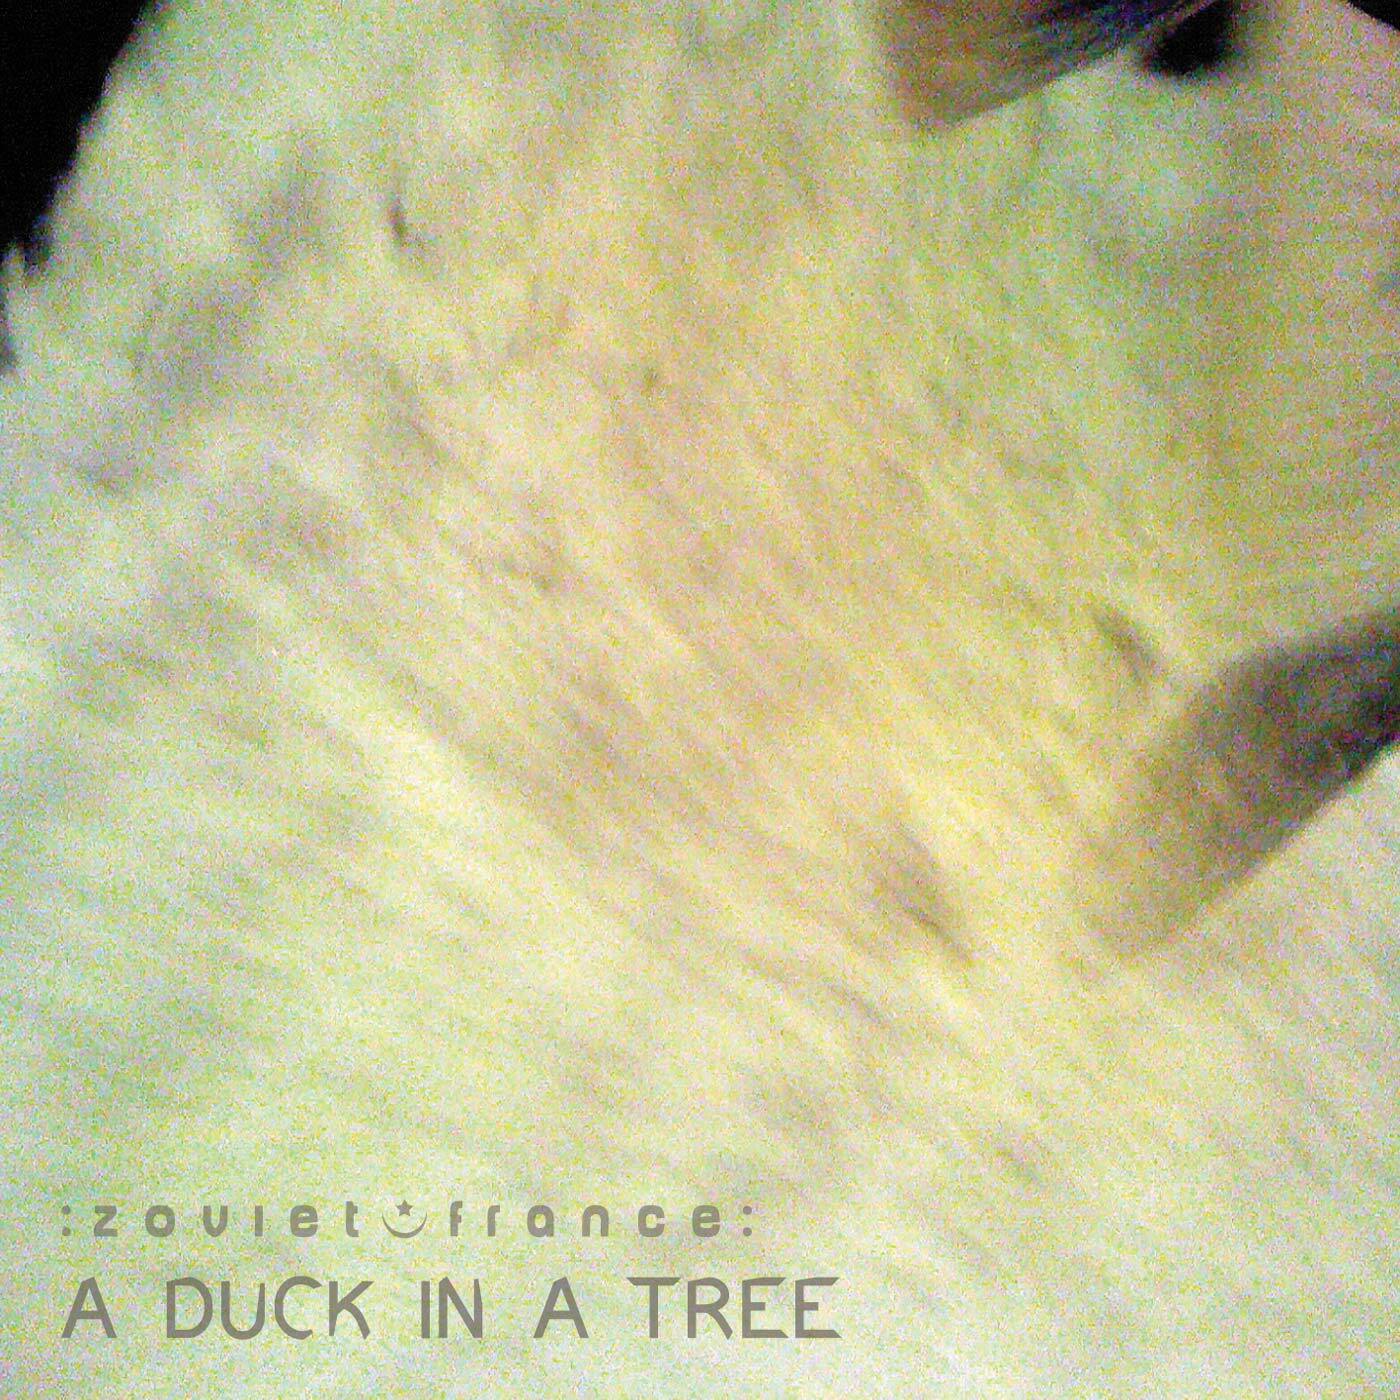 A-Duck-in-a-Tree-2014-03-29-_-The-Square